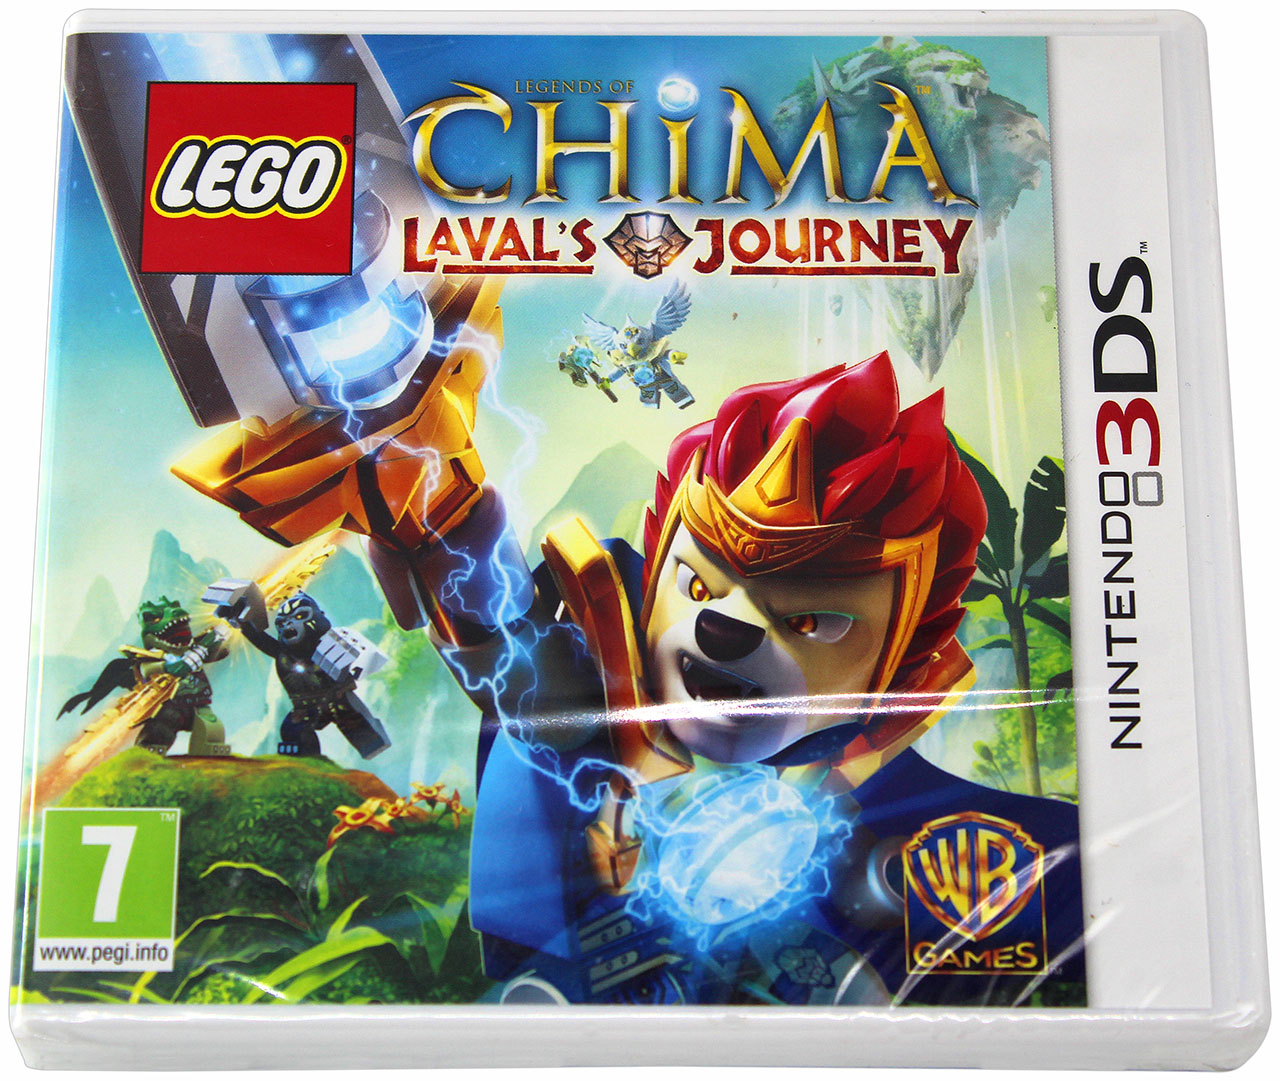 LEGO Legends of Chima Lavals Journey Game 3DS